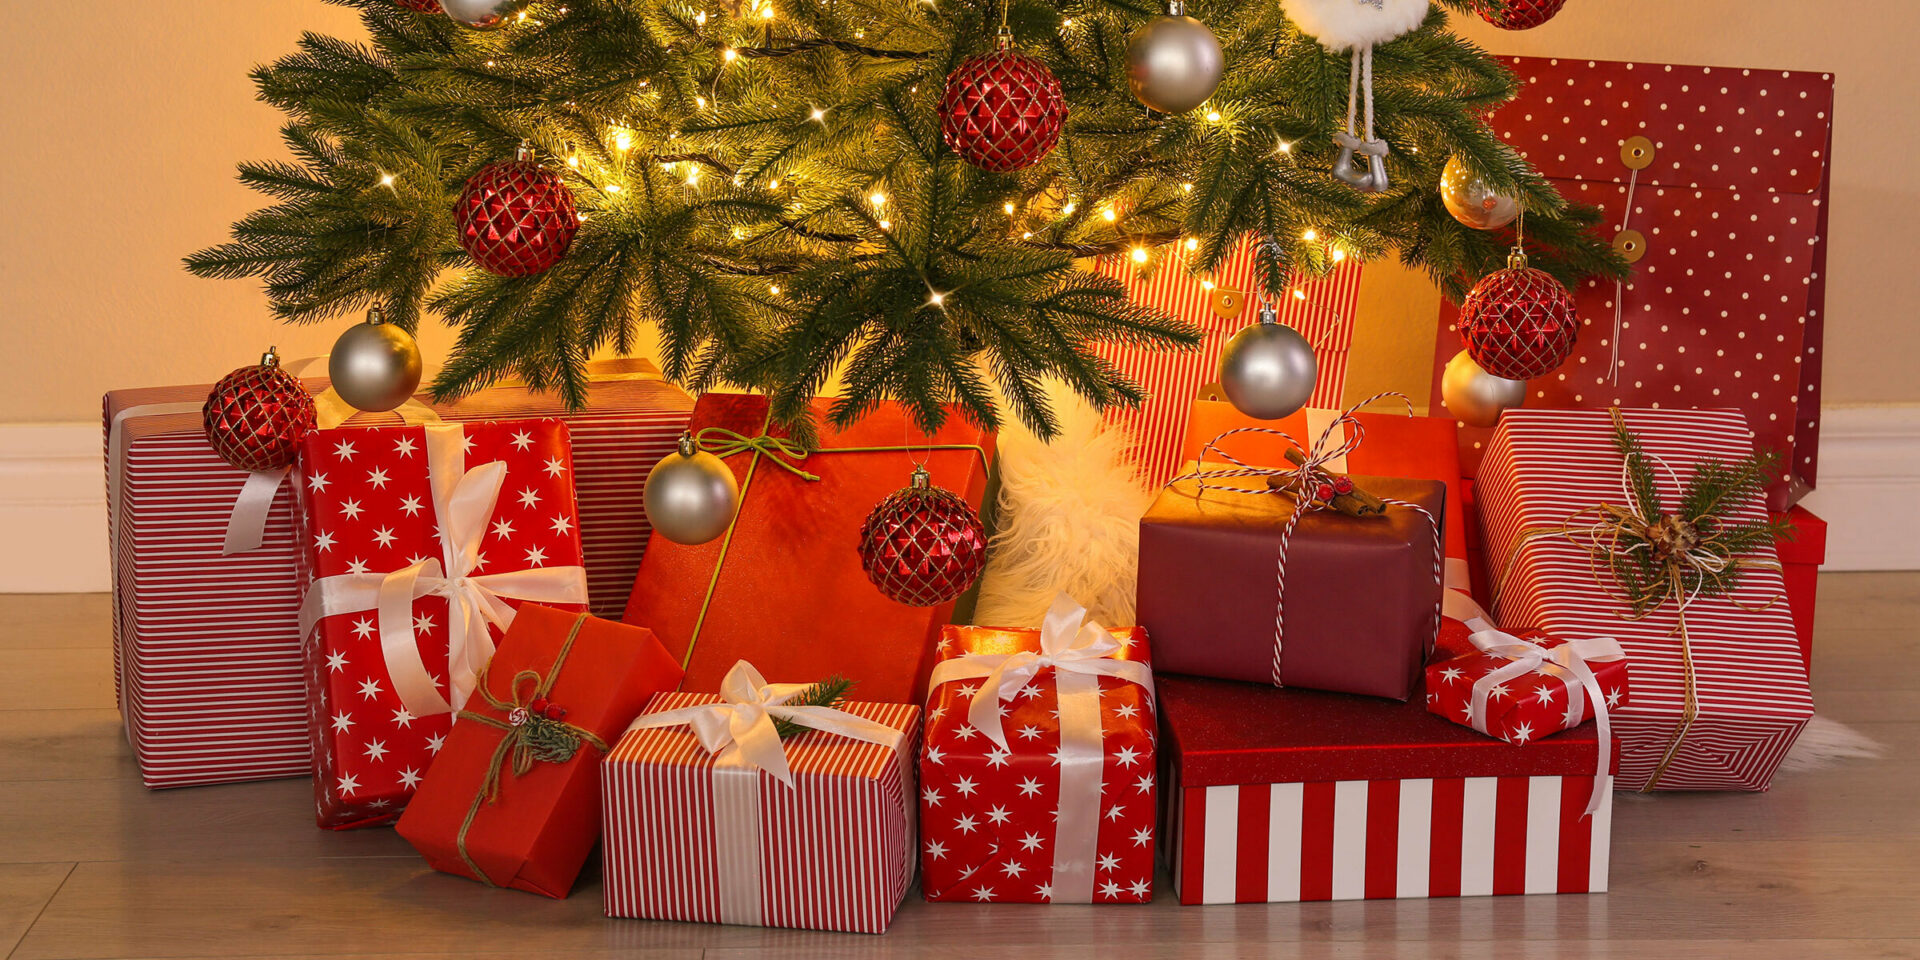 Christmas: 4 ways to gift with purpose